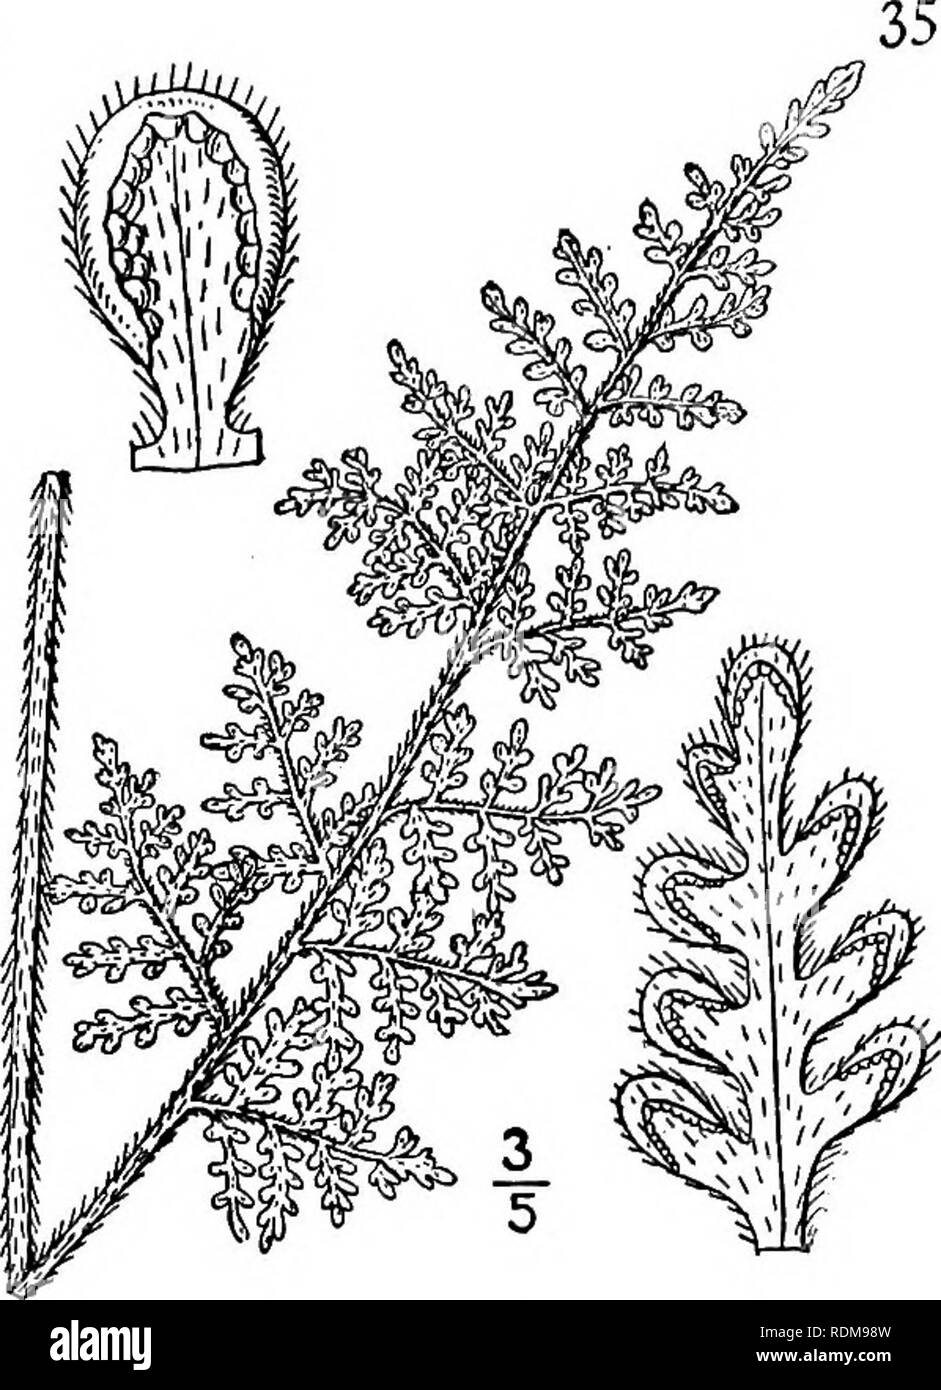 . An illustrated flora of the northern United States, Canada and the British possessions, from Newfoundland to the parallel of the southern boundary of Virginia, and from the Atlantic Ocean westward to the 102d meridian. Botany; Botany. Genus 18. FERN FAMILY.. 4. Cheilanthes tomentosa Link. Woolly Lip-fern. Fig. 81. Cheilanthes tomentosa Link, Hort. Berol. 2: 42. 1833. Rootstock stout, short, densely chaffy with rigid slender striped and concolorous bright brown scales. Stipes tufted, 4'-8' long, rather stout, densely brown- tomentose even when mature; blades oblong-lanceo- late, 3-pinnate, 6' Stock Photo